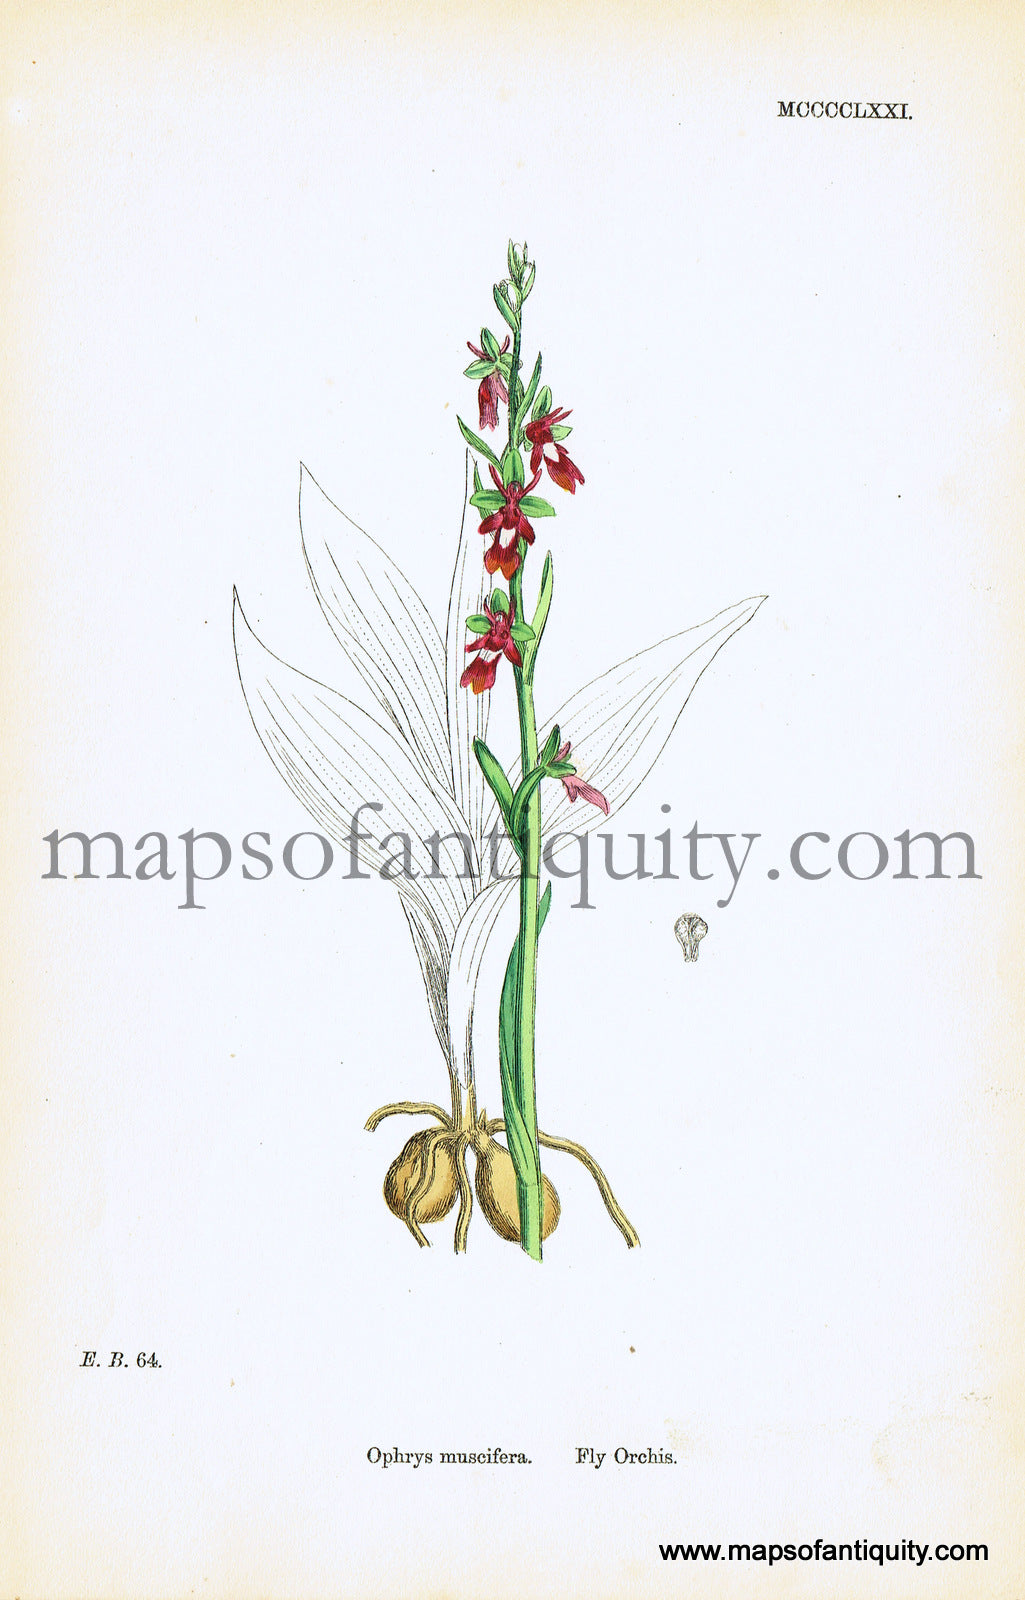 Antique-Hand-Colored-Print-Ophrys-muscifera-Antique-Prints-Natural-History-Botanical-c.-1860-Sowerby-Maps-Of-Antiquity